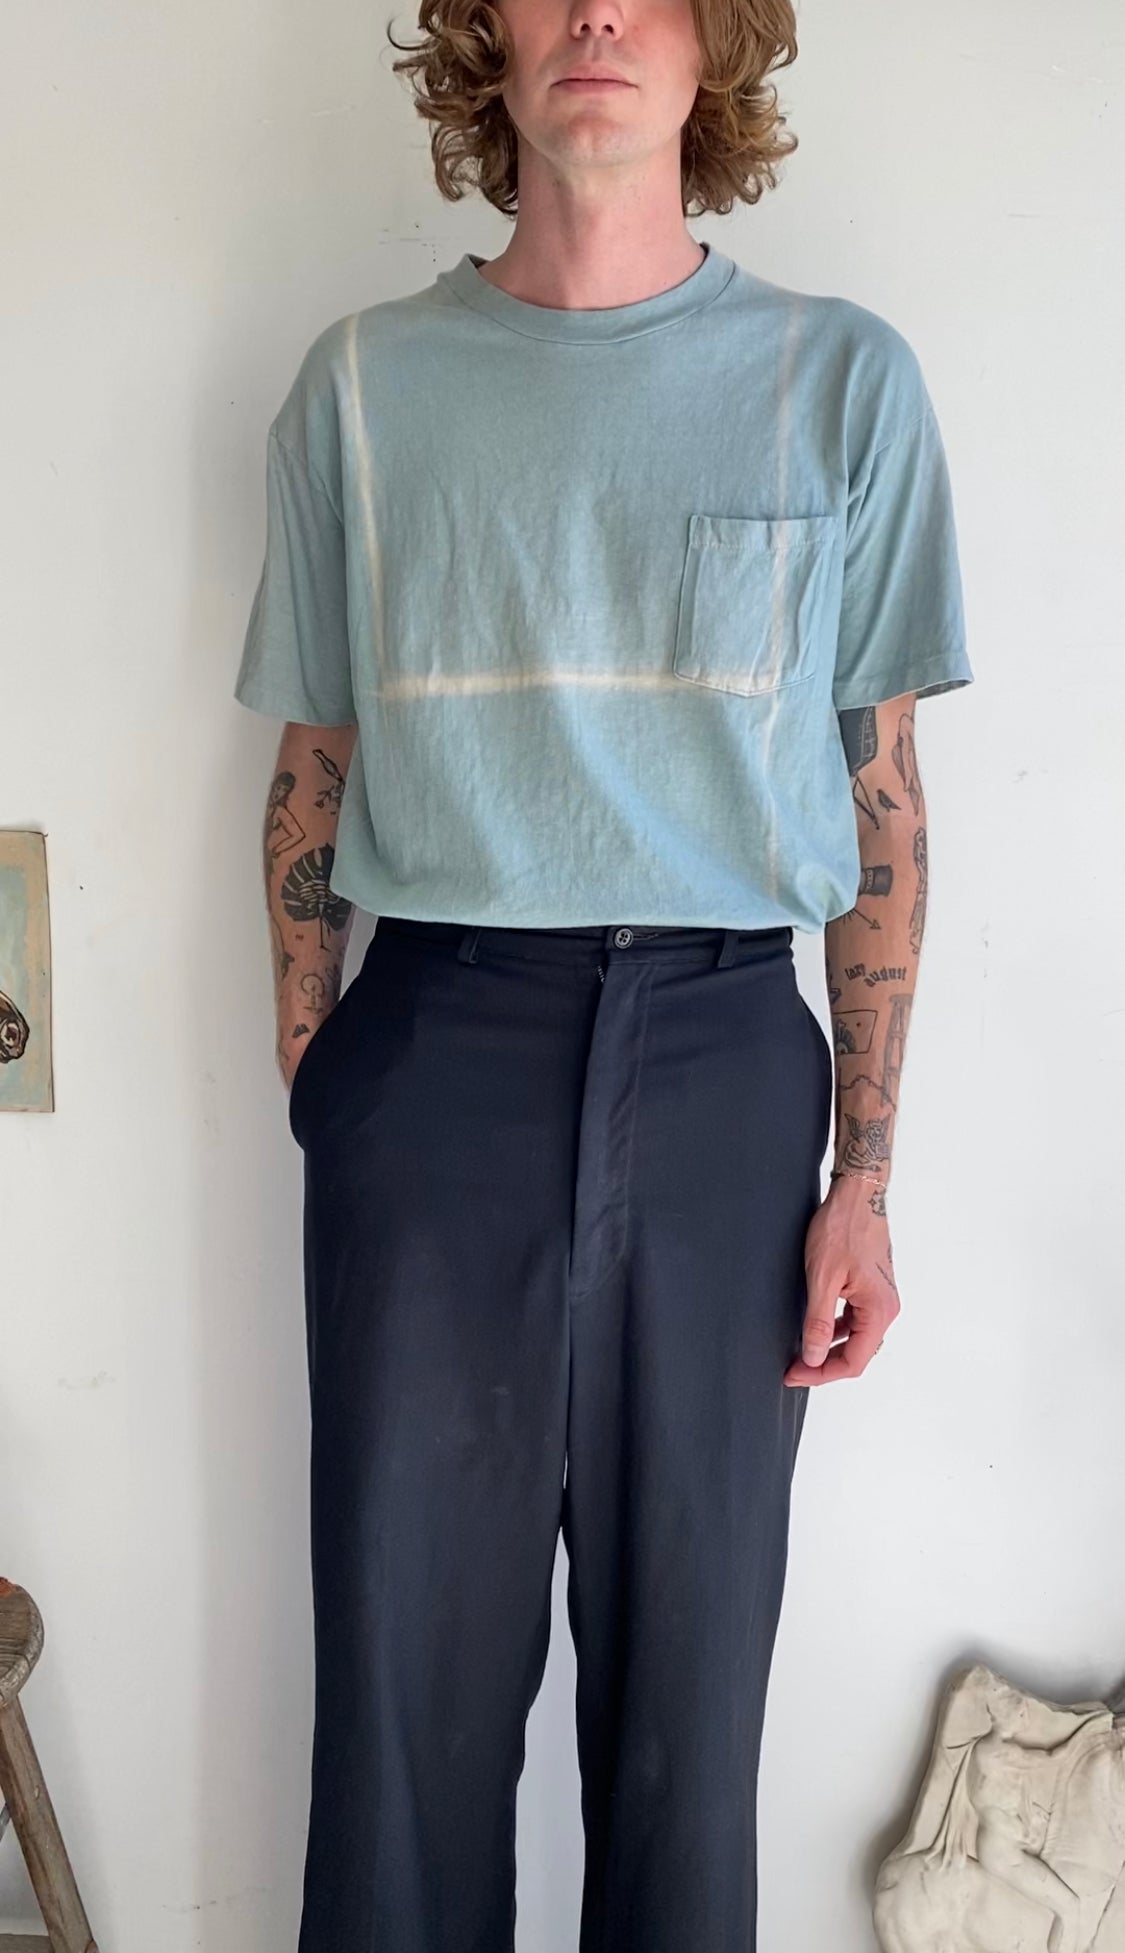 1980s Sunfaded Turquoise Pocket Tee (XL)